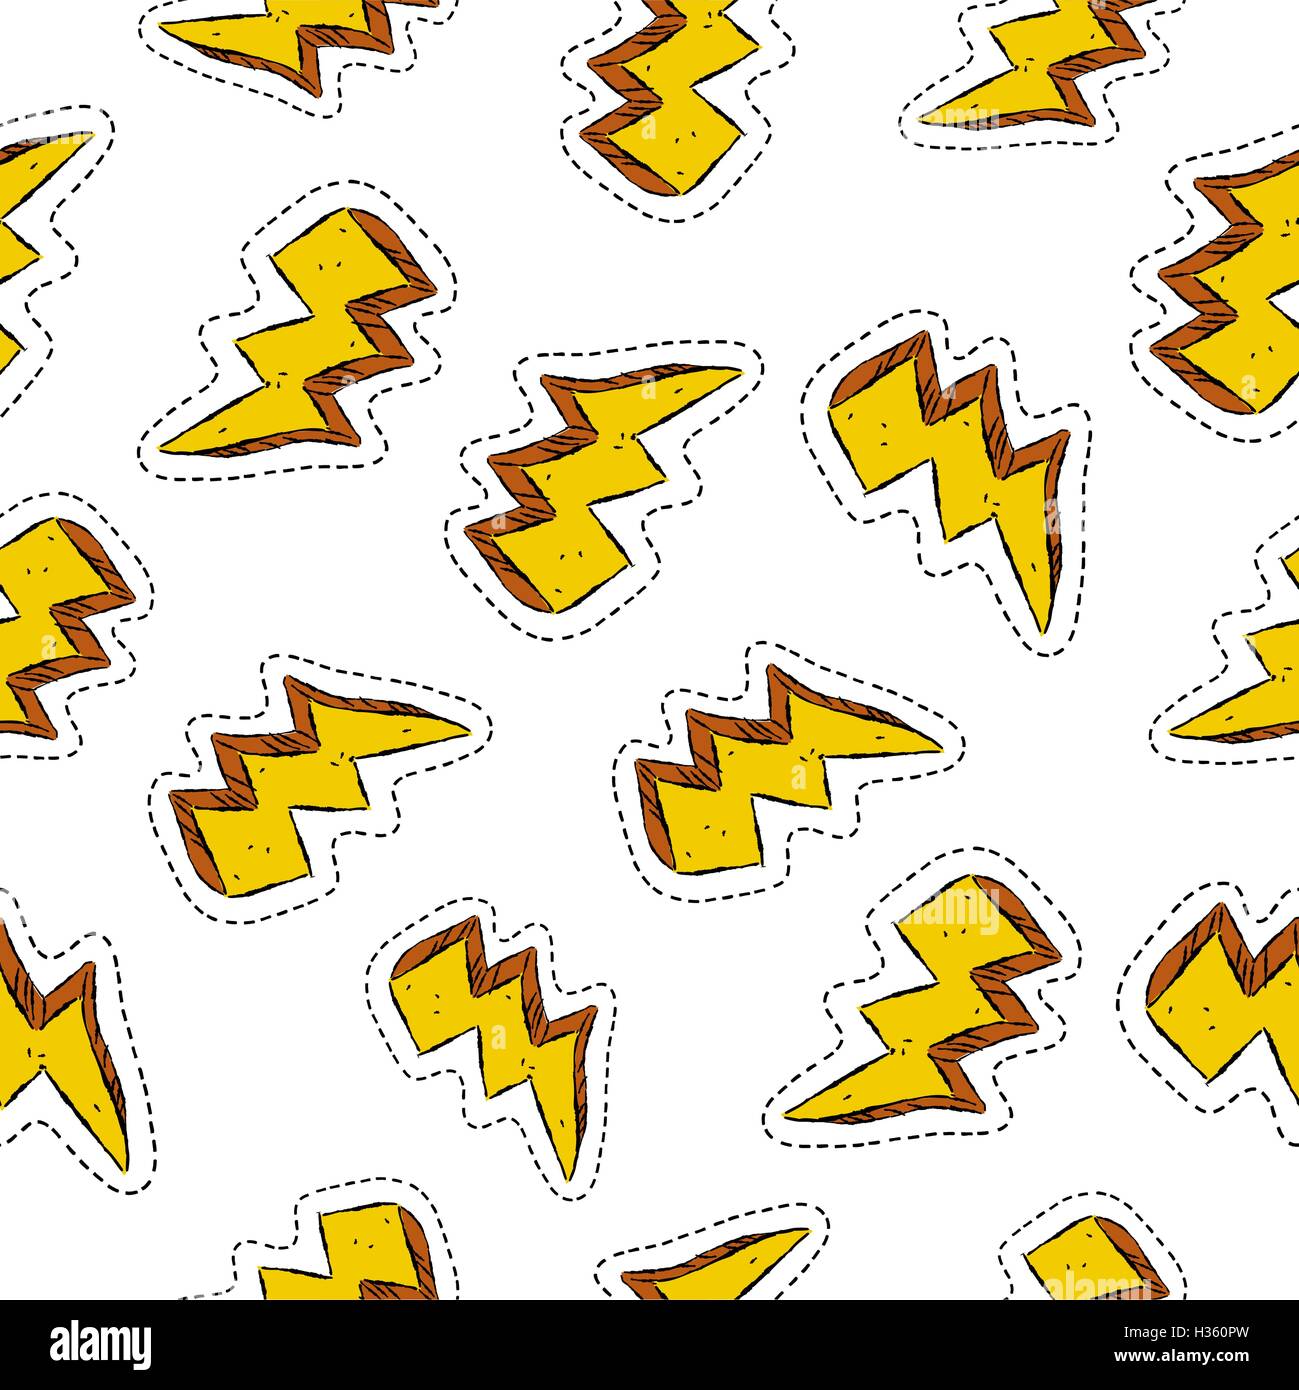 Hand drawn thunder bolt seamless pattern with electric ray patch icons, retro illustration background. EPS10 vector. Stock Vector